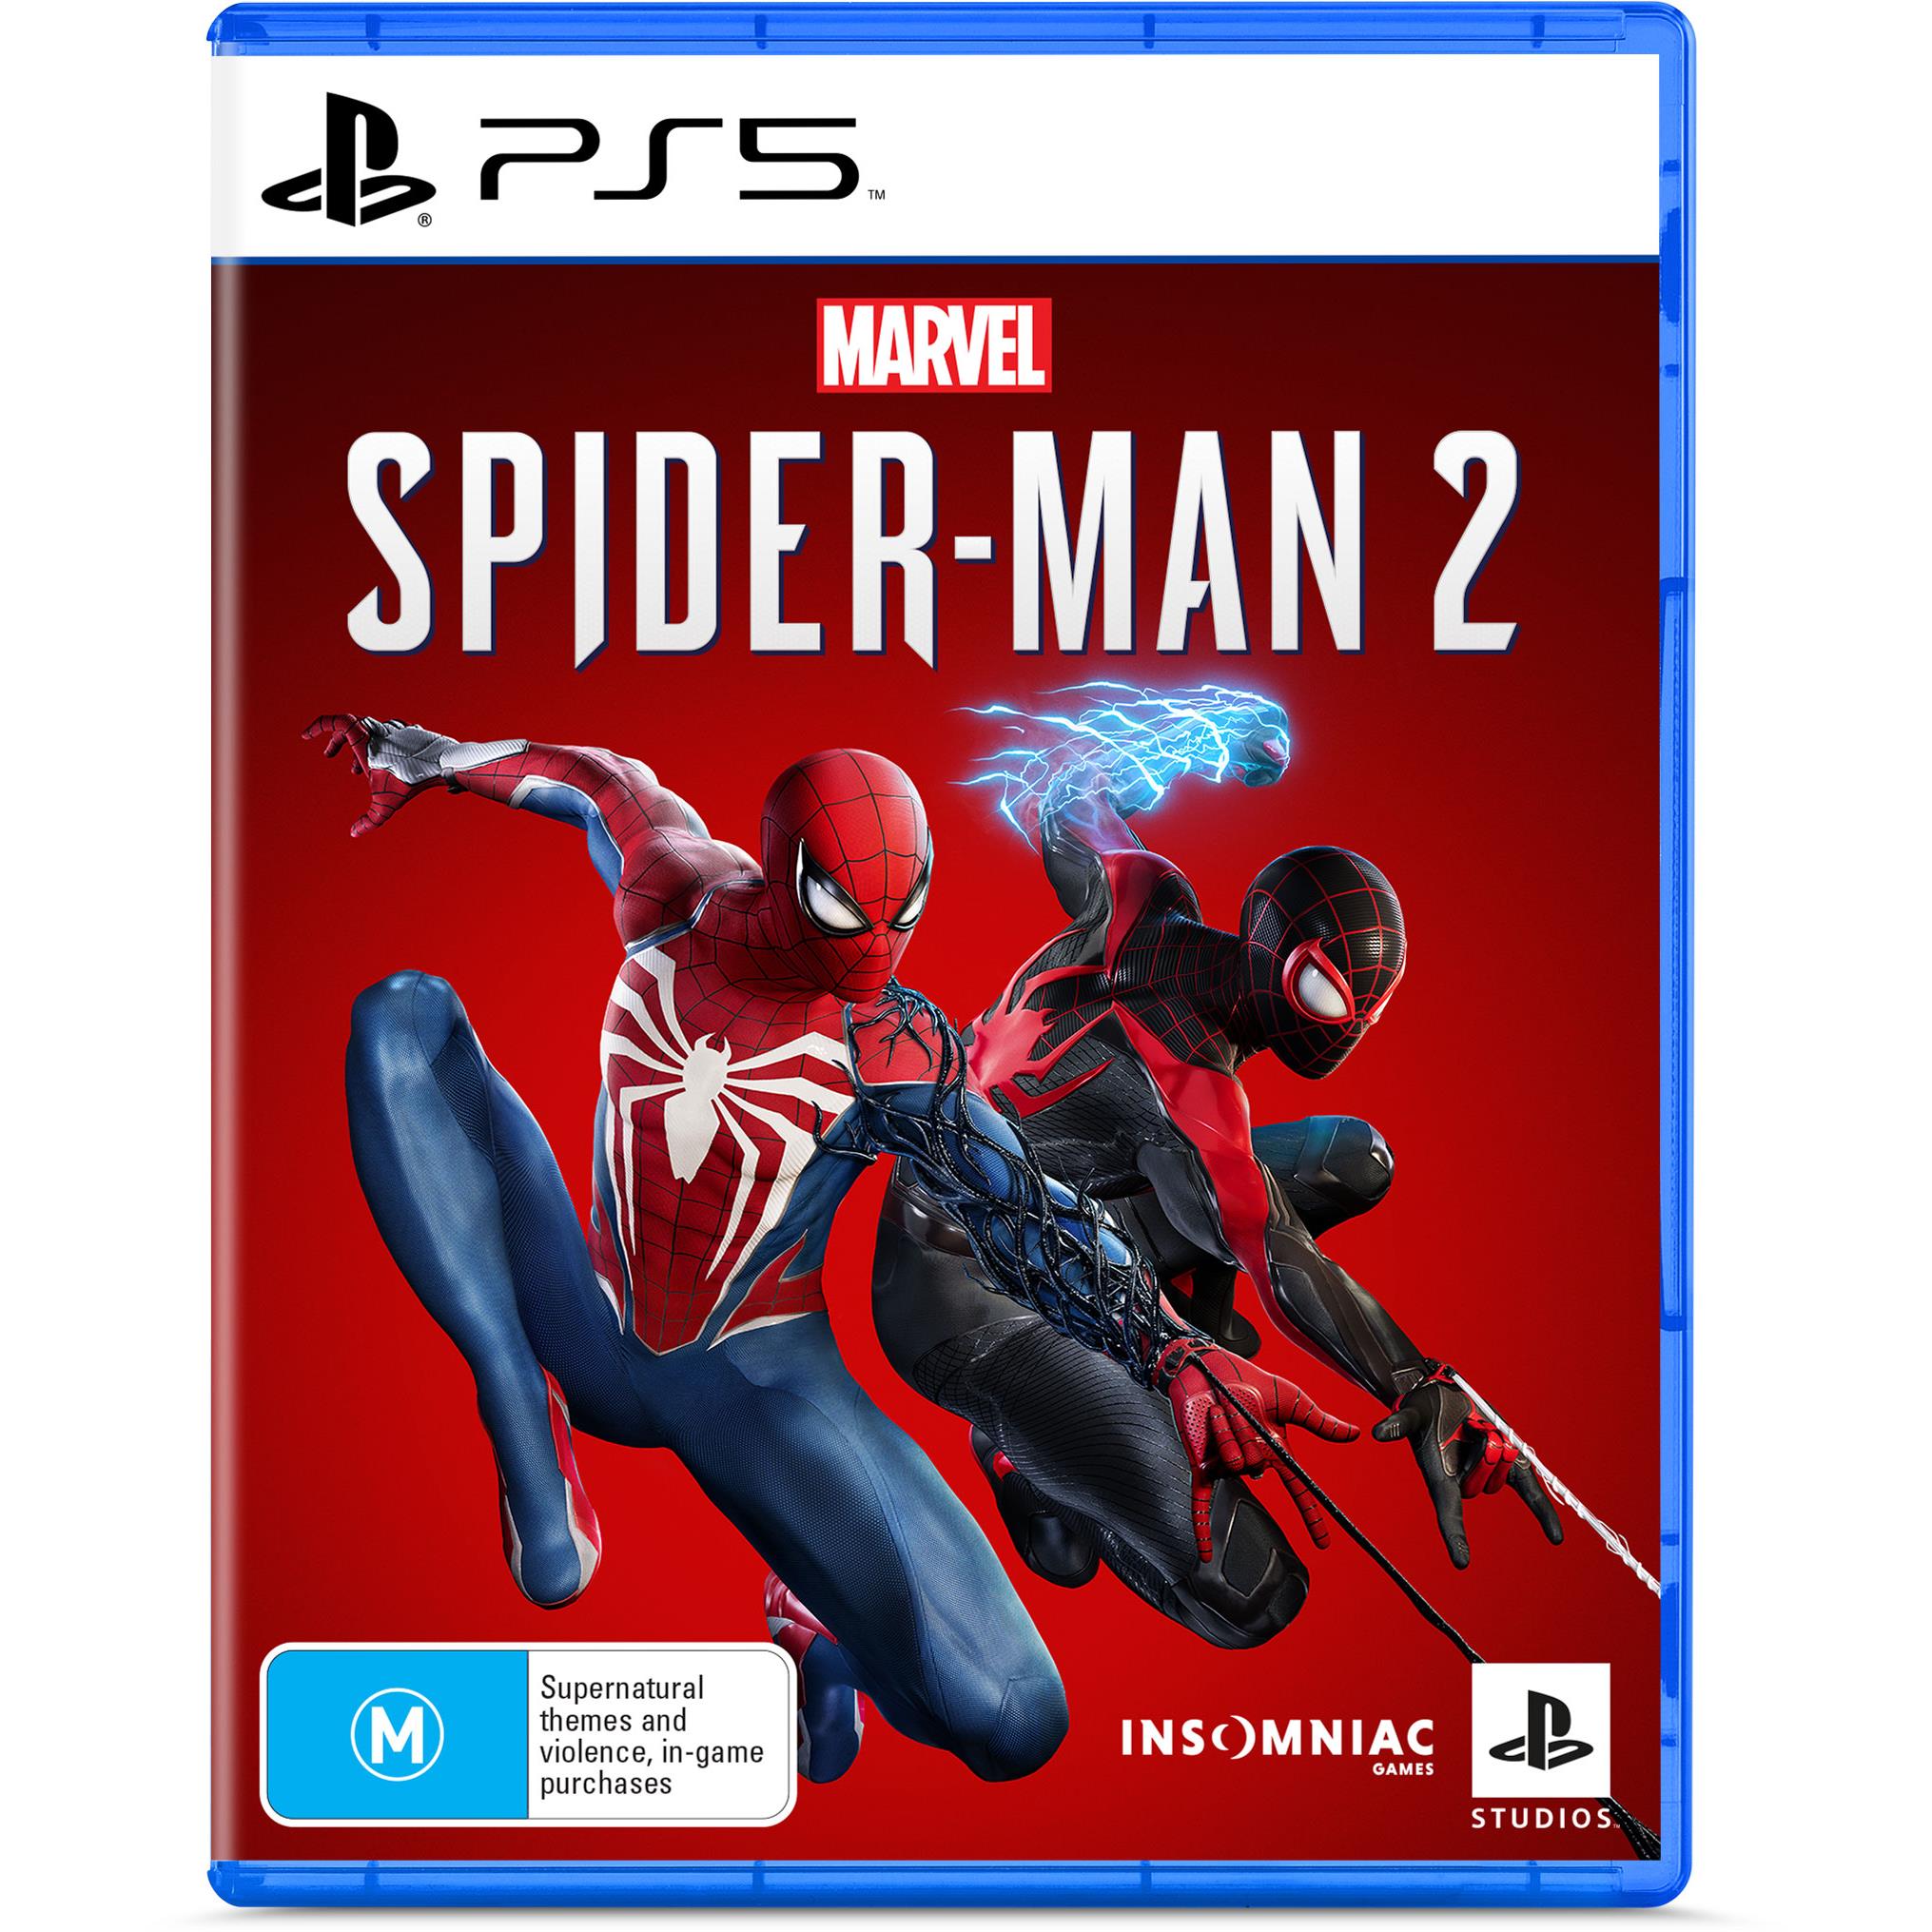 Toys　Goldfields　Marvel's　(PS5)　Spider-Man　Games